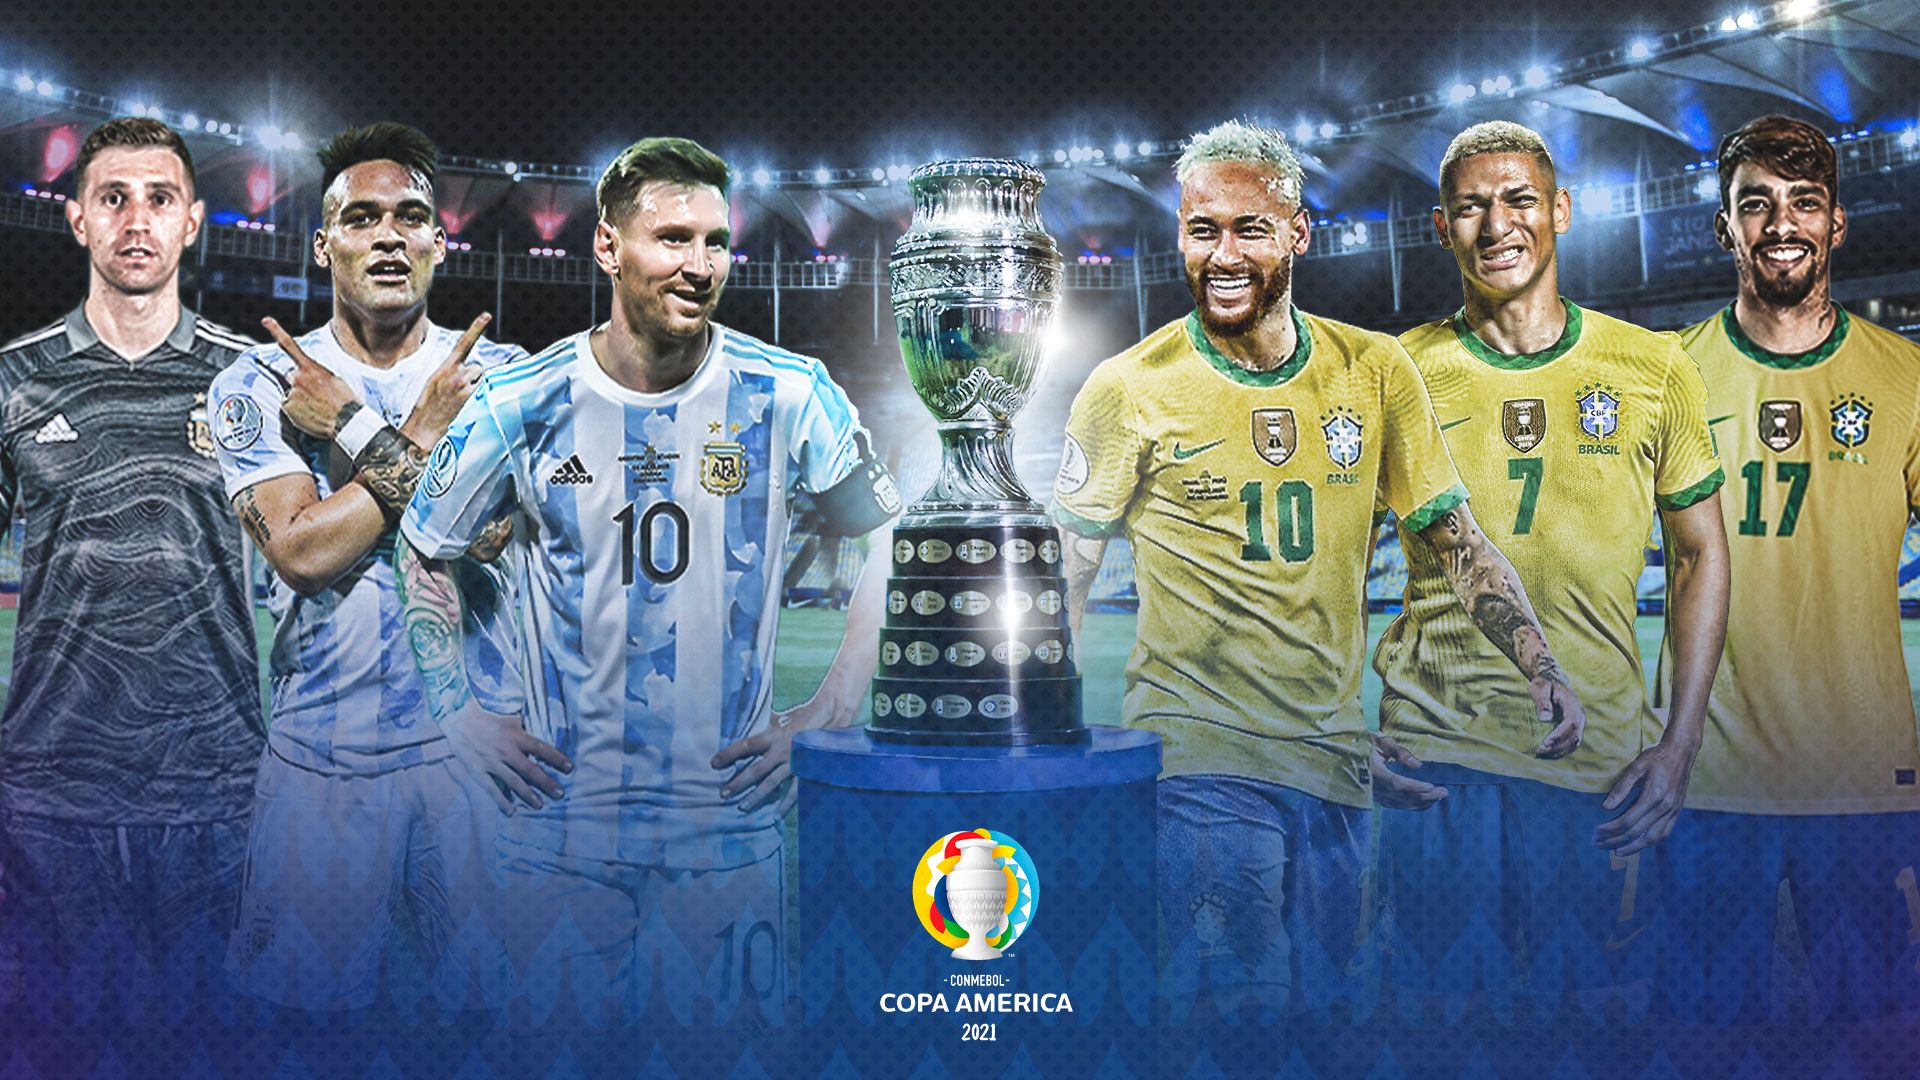 Argentina vs Brazil in the final of the CONMEBOL Copa America: Time and TV